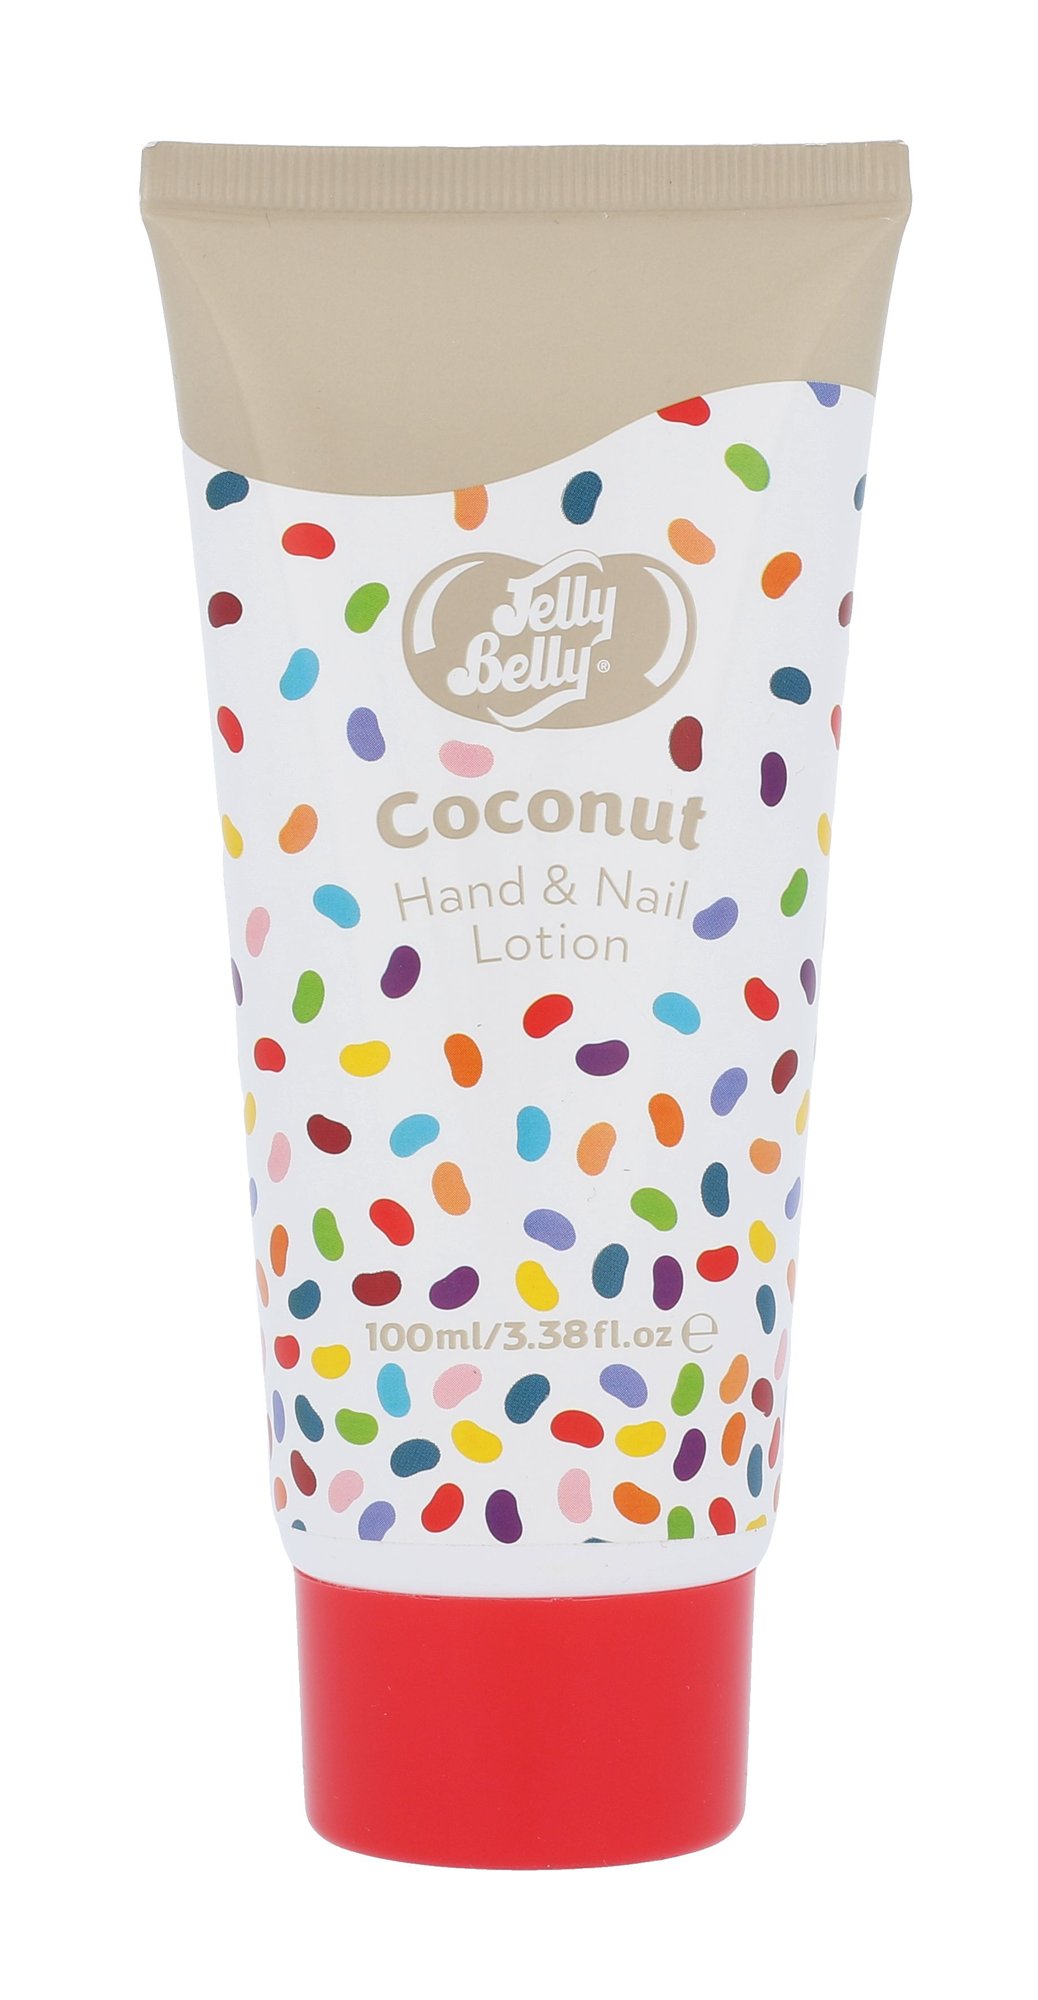 Jelly Belly Coconut Hand & Nail Lotion